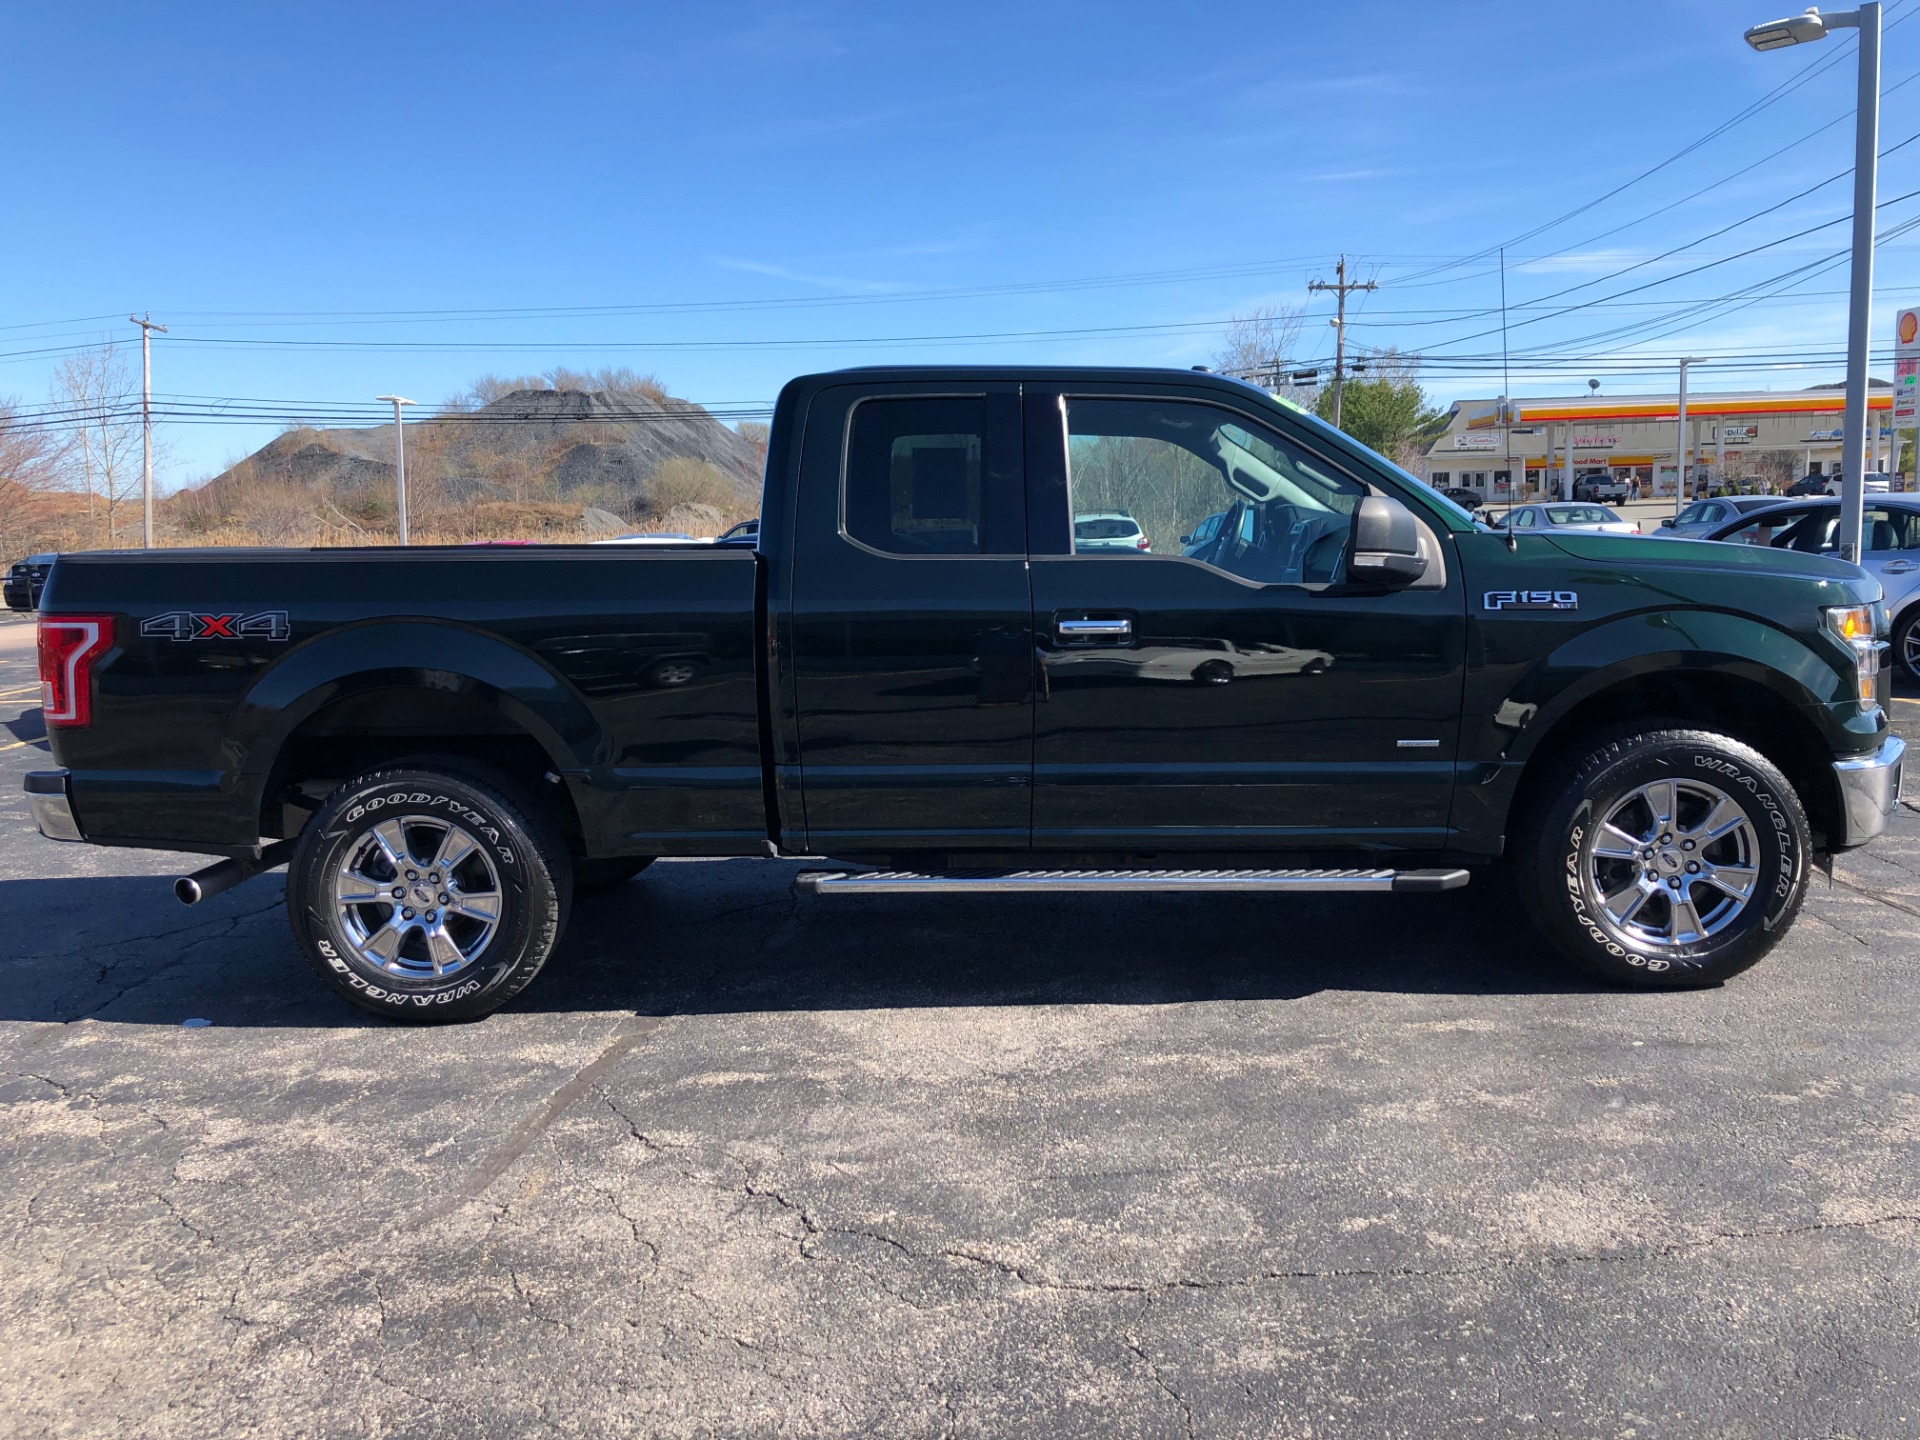 Used 2015 FORD F150 SUPER CAB For Sale $27999 Executive.